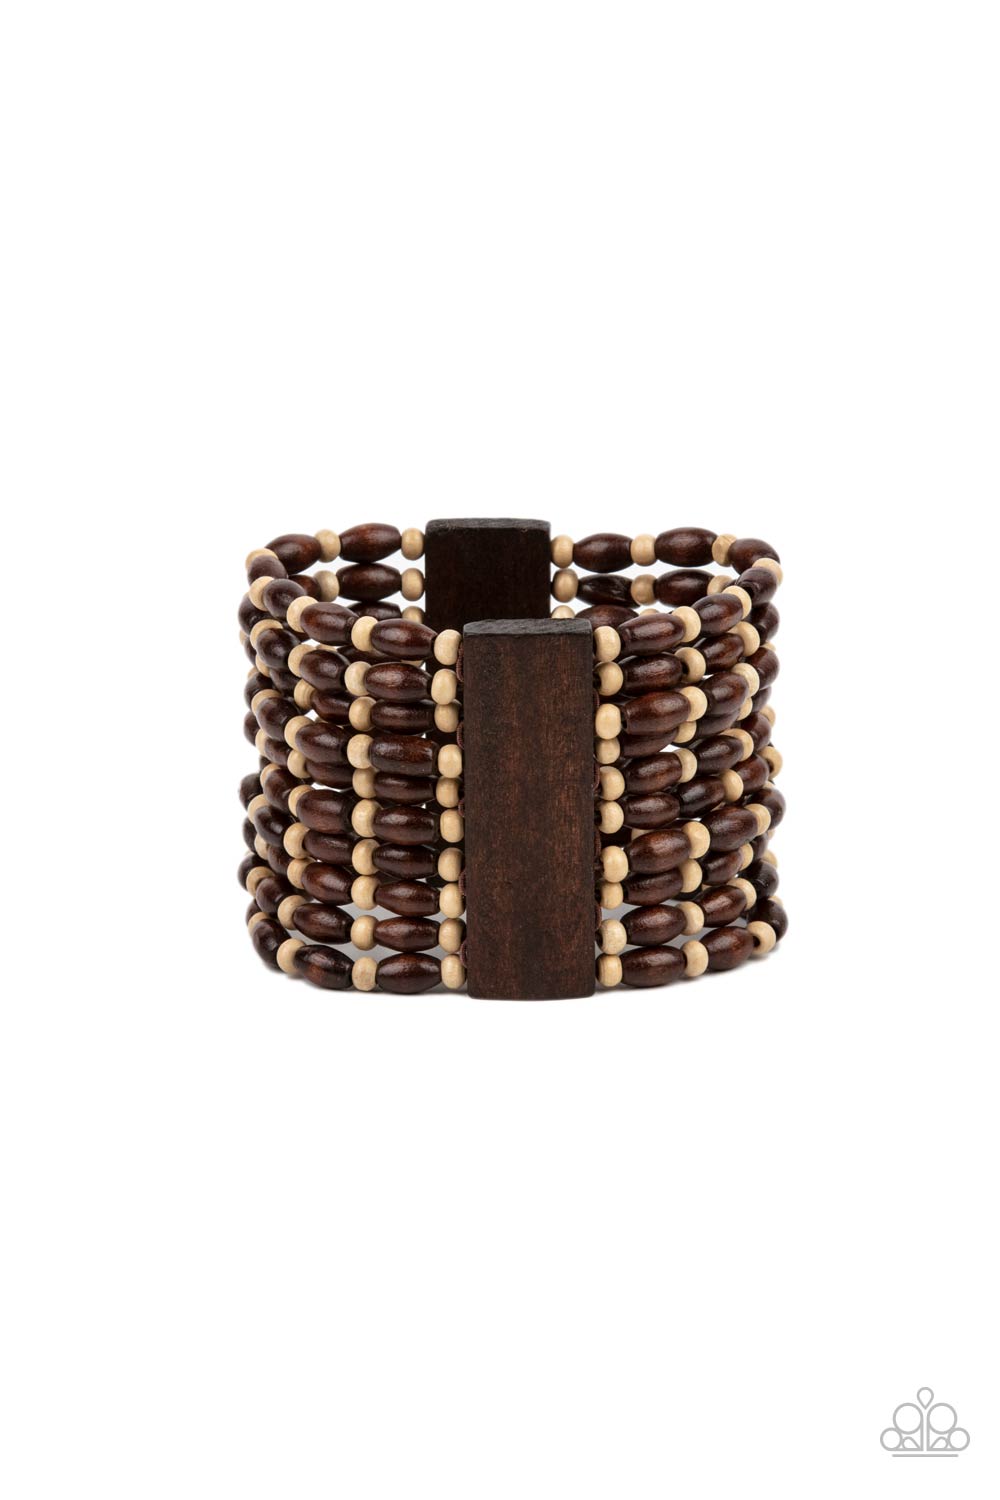 Cayman Carnival - Brown Wood Stretch Bracelets held together with rectangular wooden frames, an earthy collection of white wooden beads and brown oval wooden beads are threaded along stretchy bands around the wrist for a bold beach inspired fashion.  Sold as one individual bracelet.